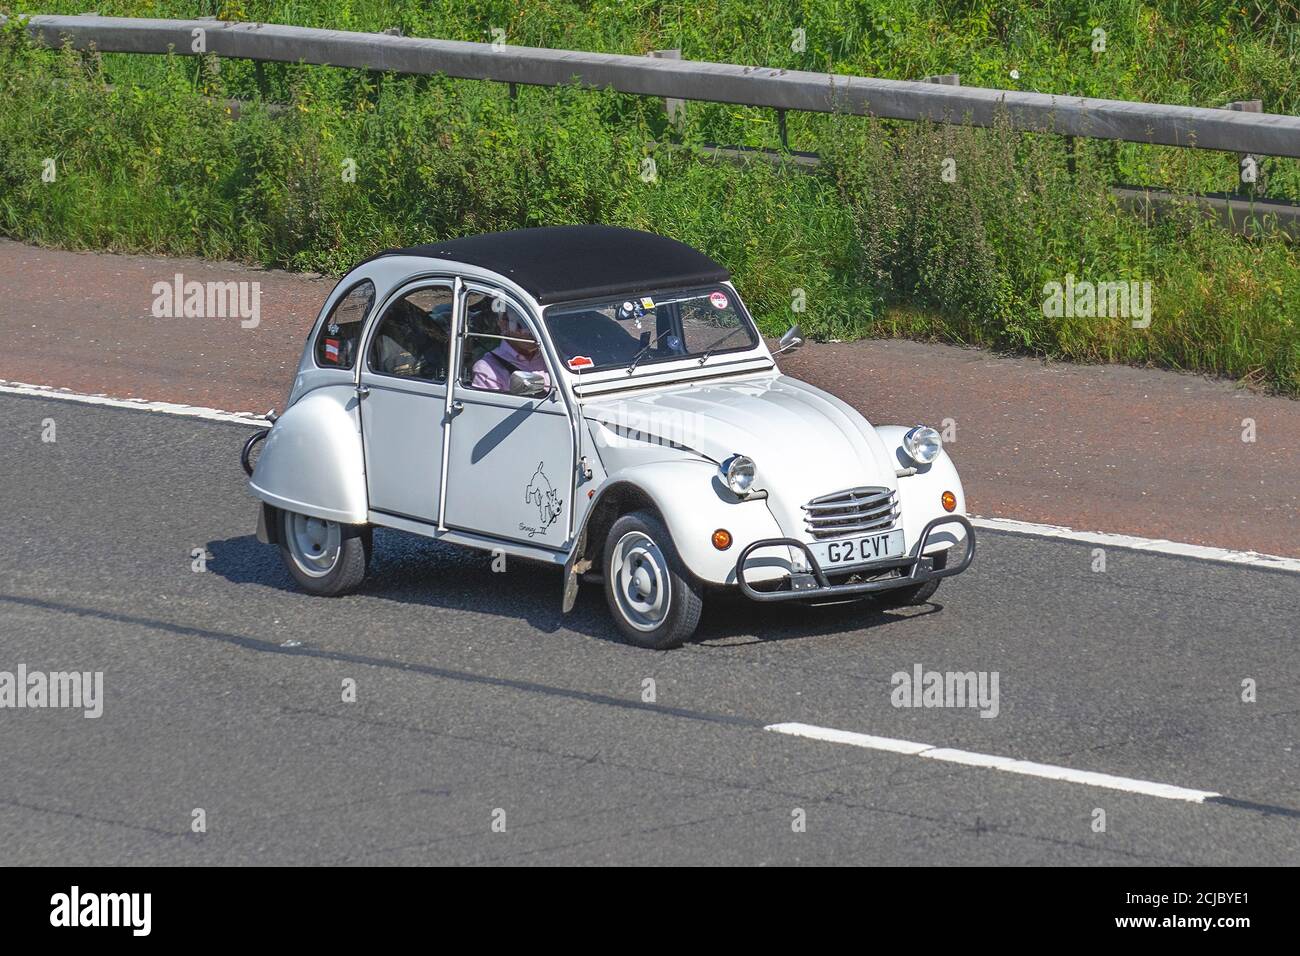 1990 90s nineties white French Citroën 2 CV6 Special; Vehicular traffic moving vehicles, cars driving. French vehicle on UK roads, motors, motoring on the M6 motorway highway network. Stock Photo